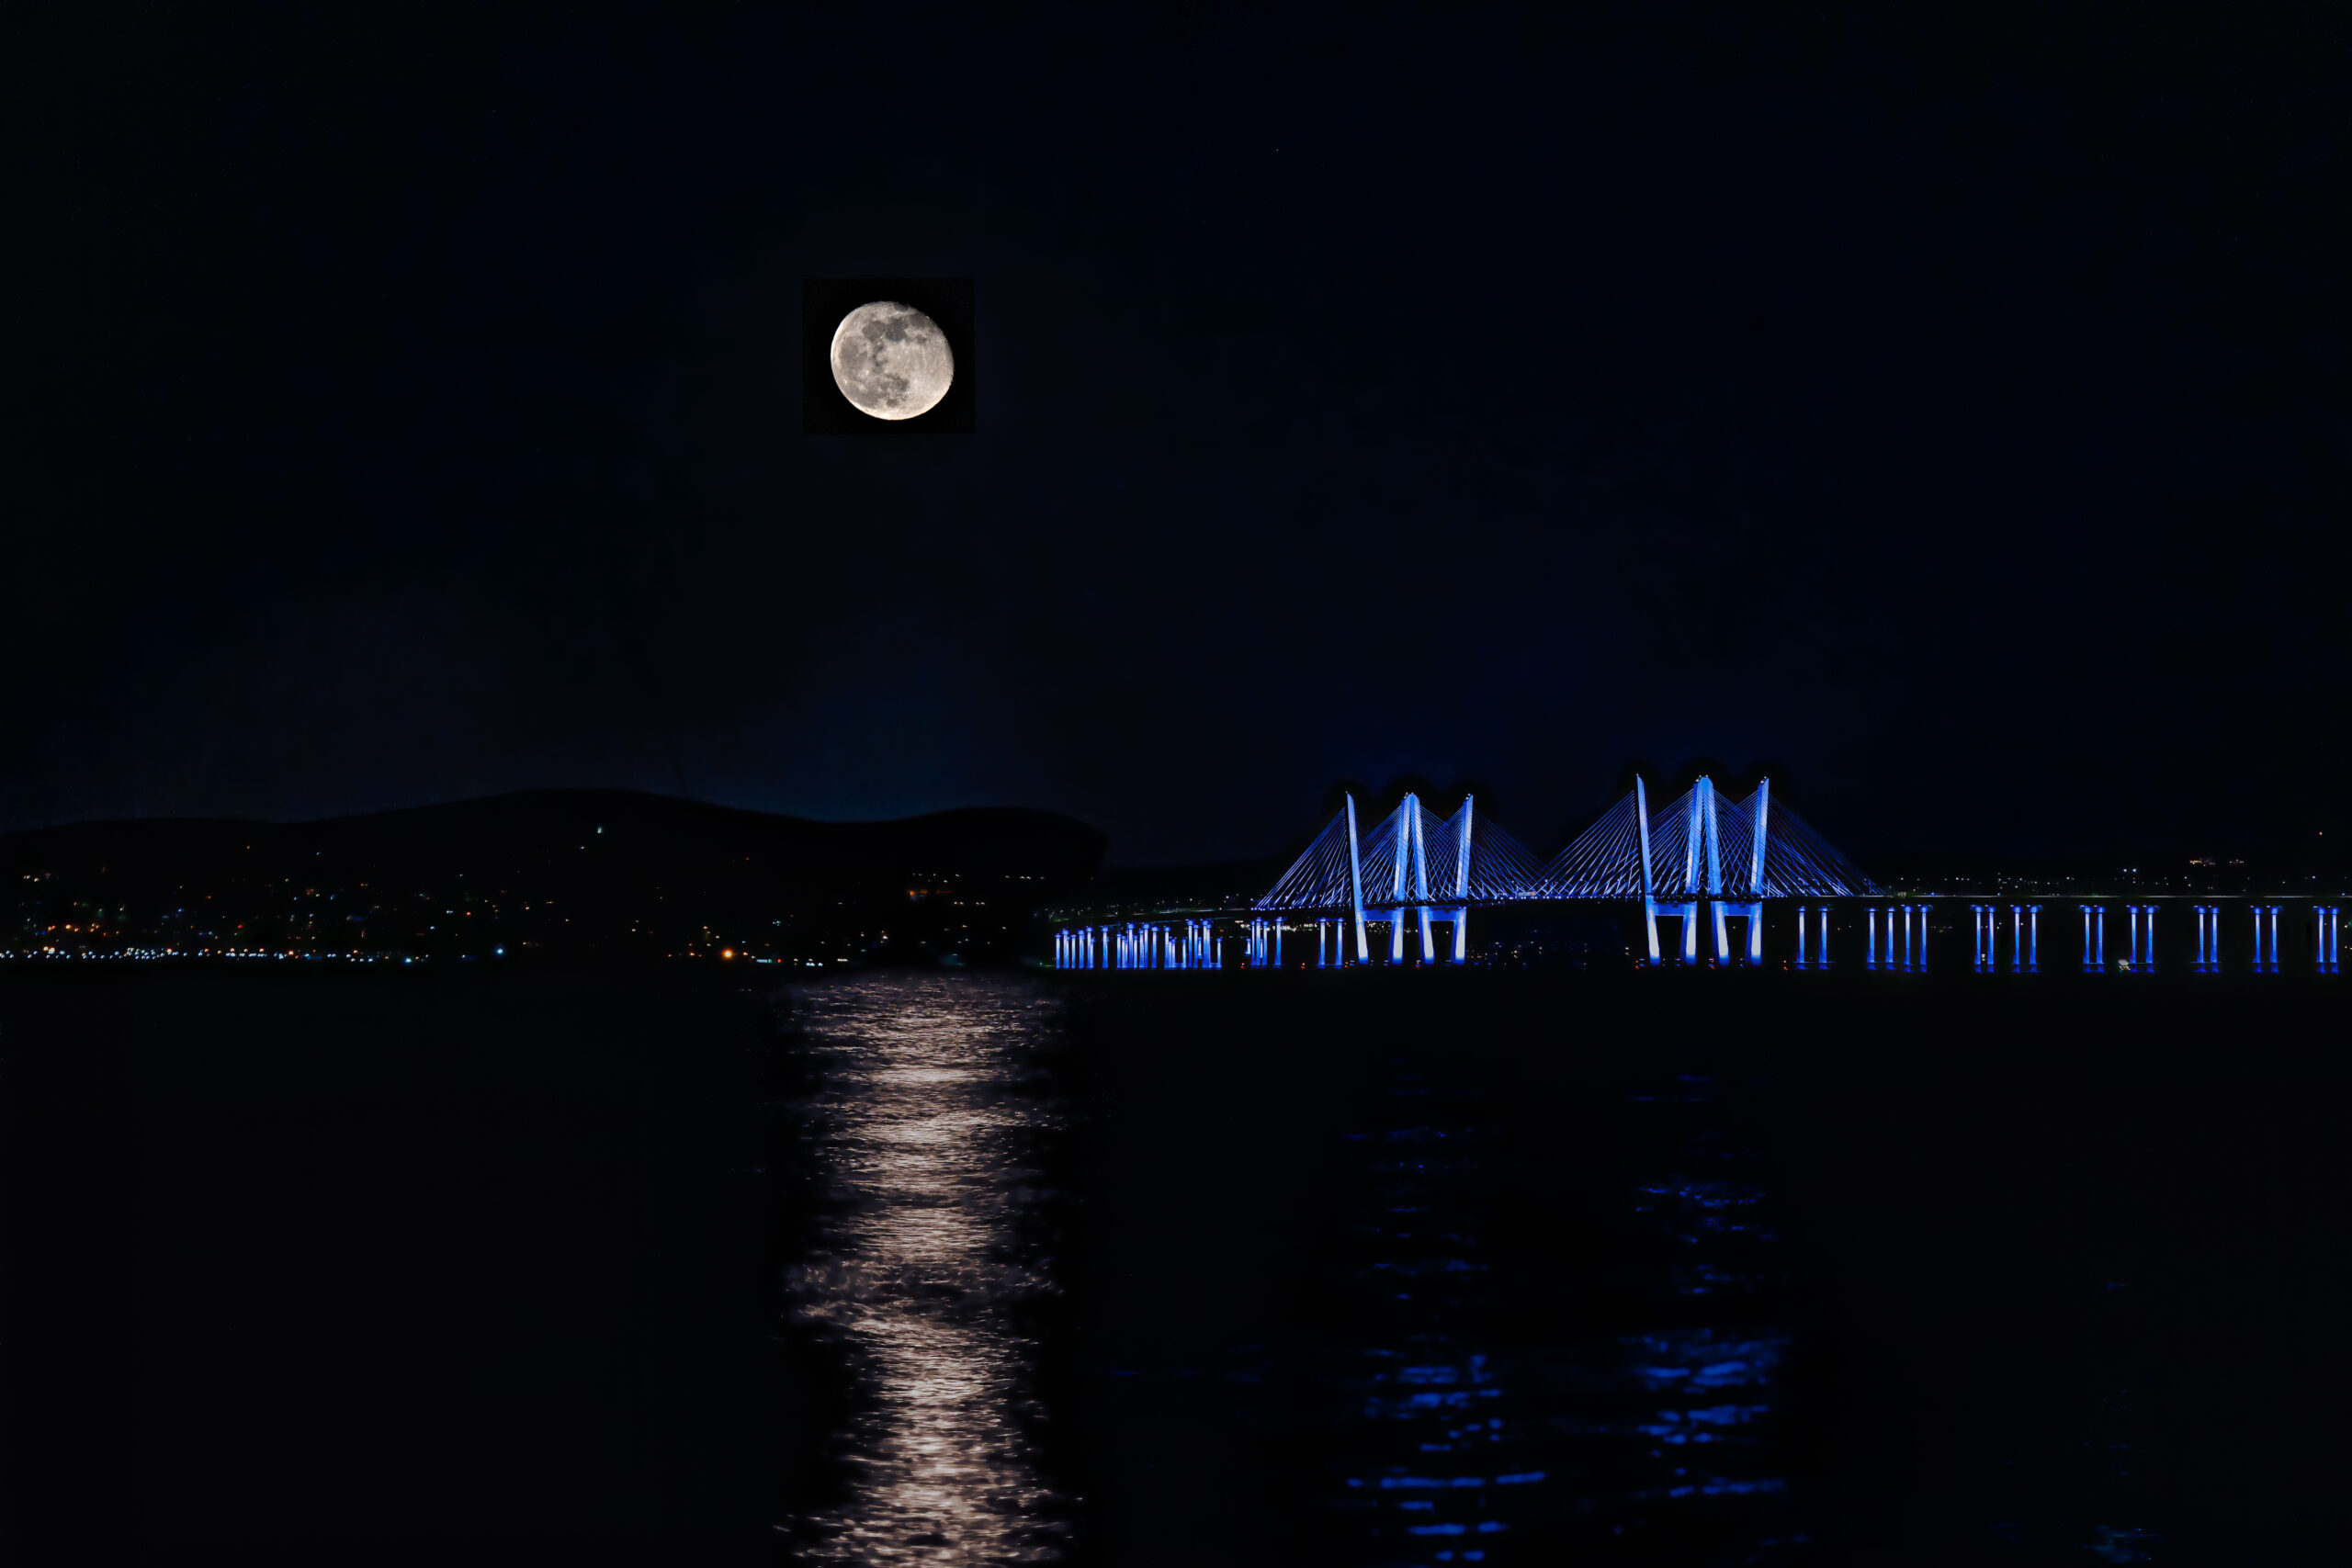 Almost full moon rising over river and bridge lit with blue lights.